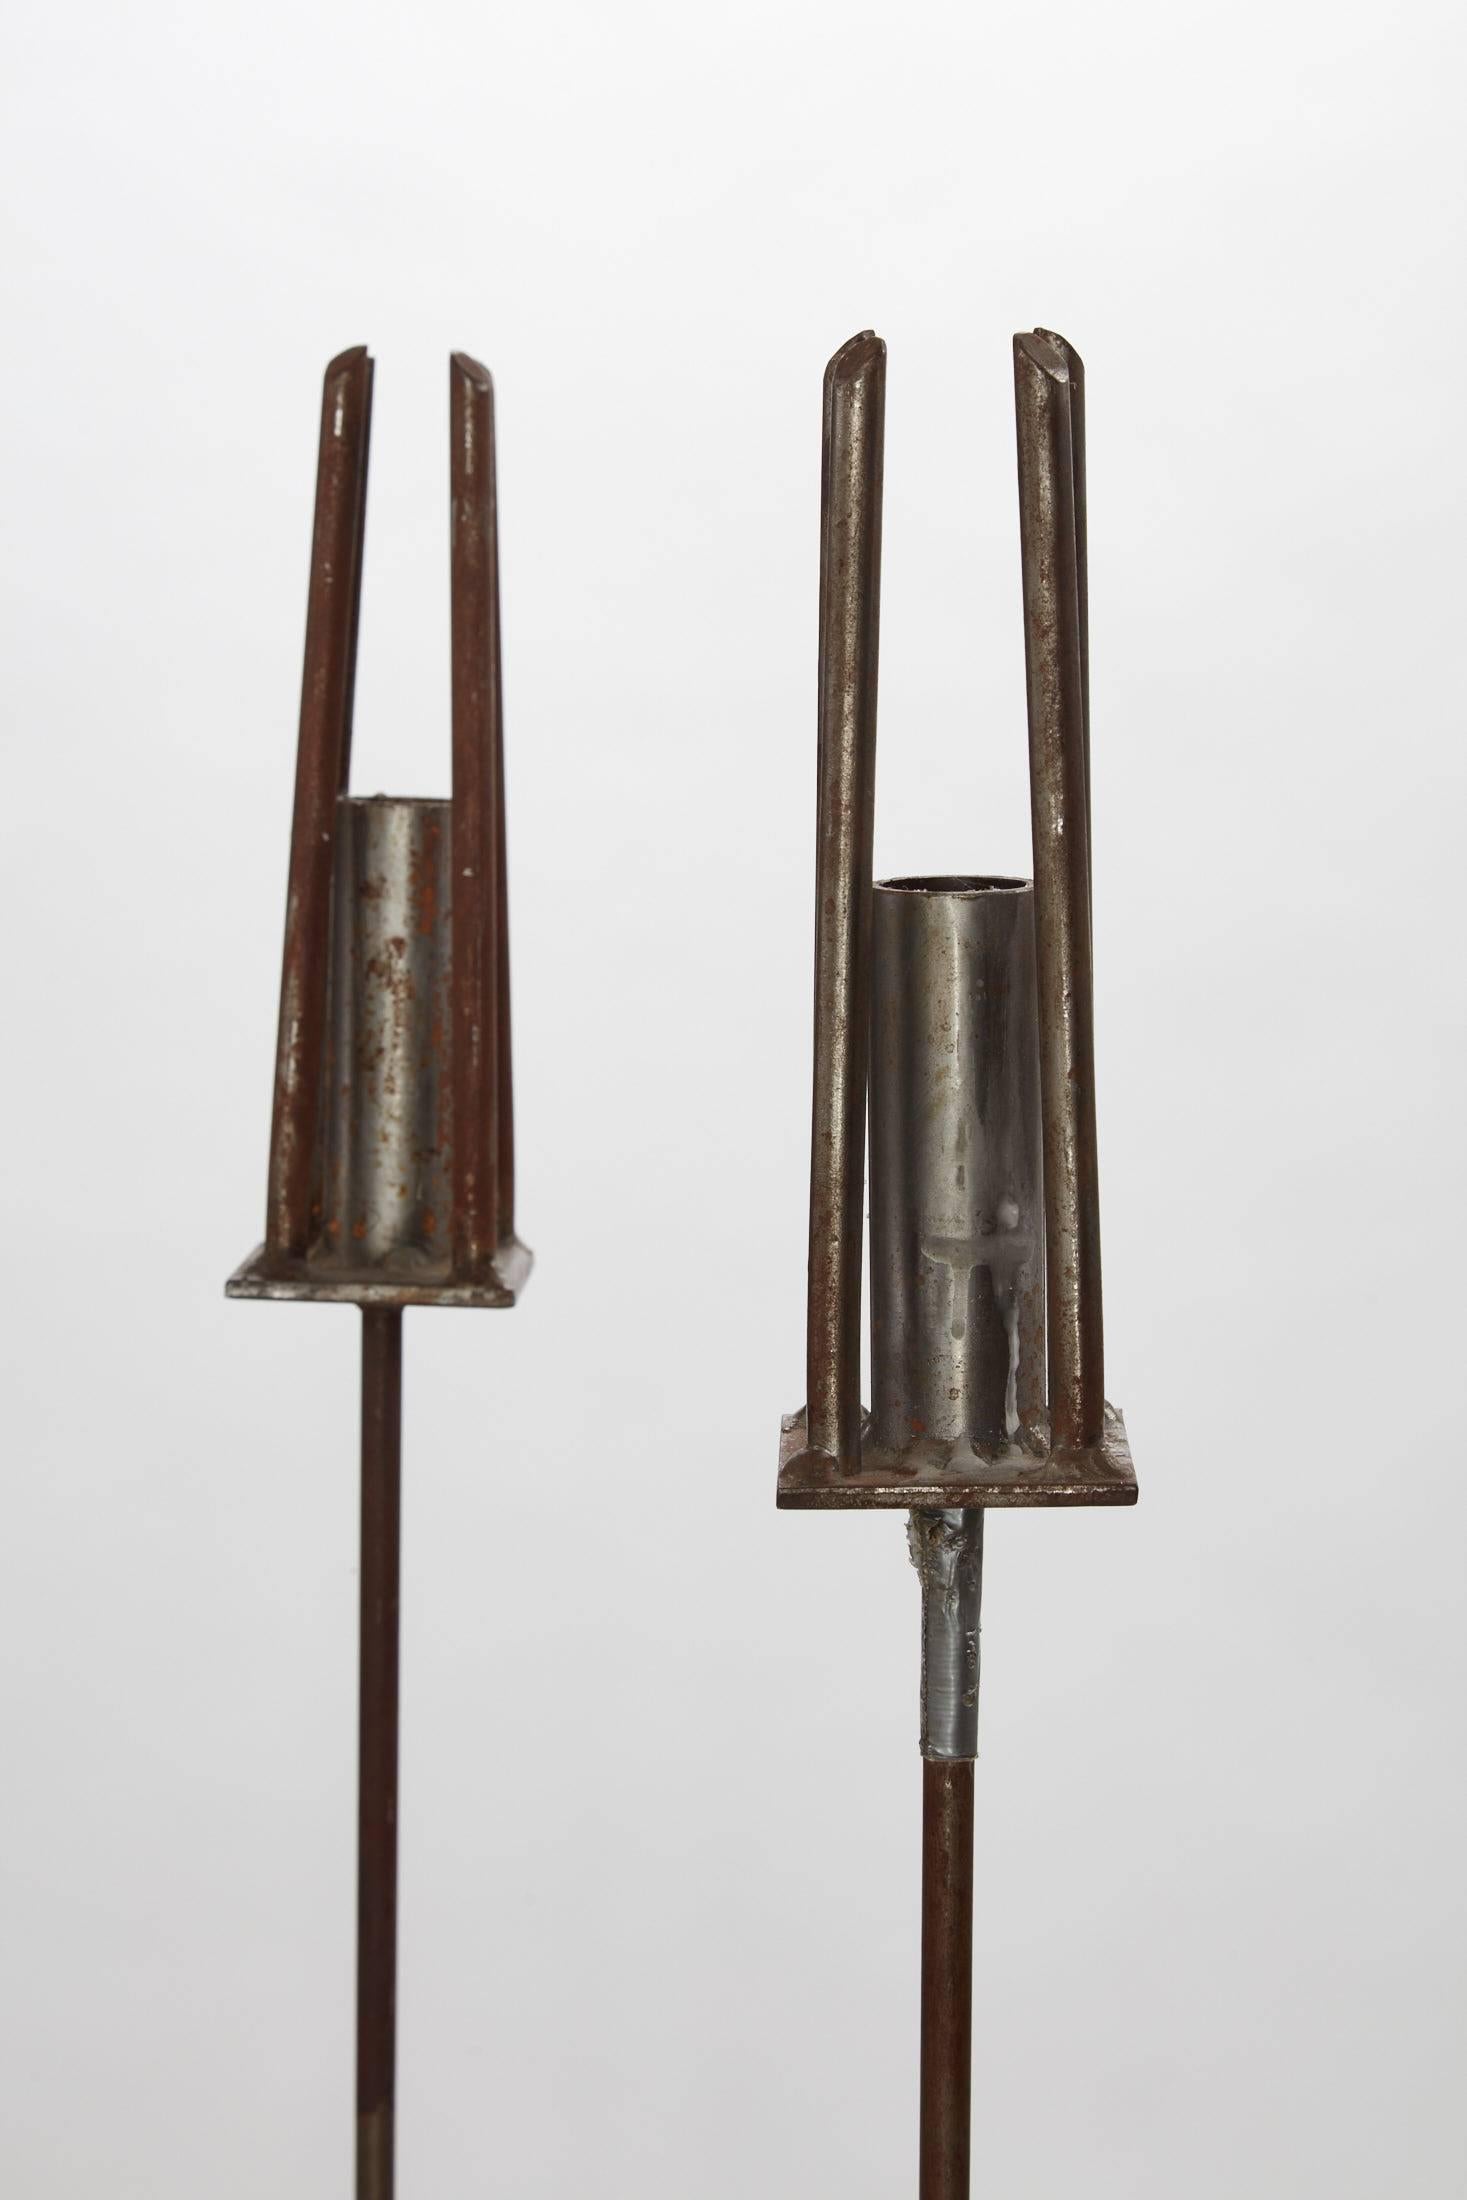 20th century pair of tall/floor iron candlesticks



Measures: Candlesticks are 52